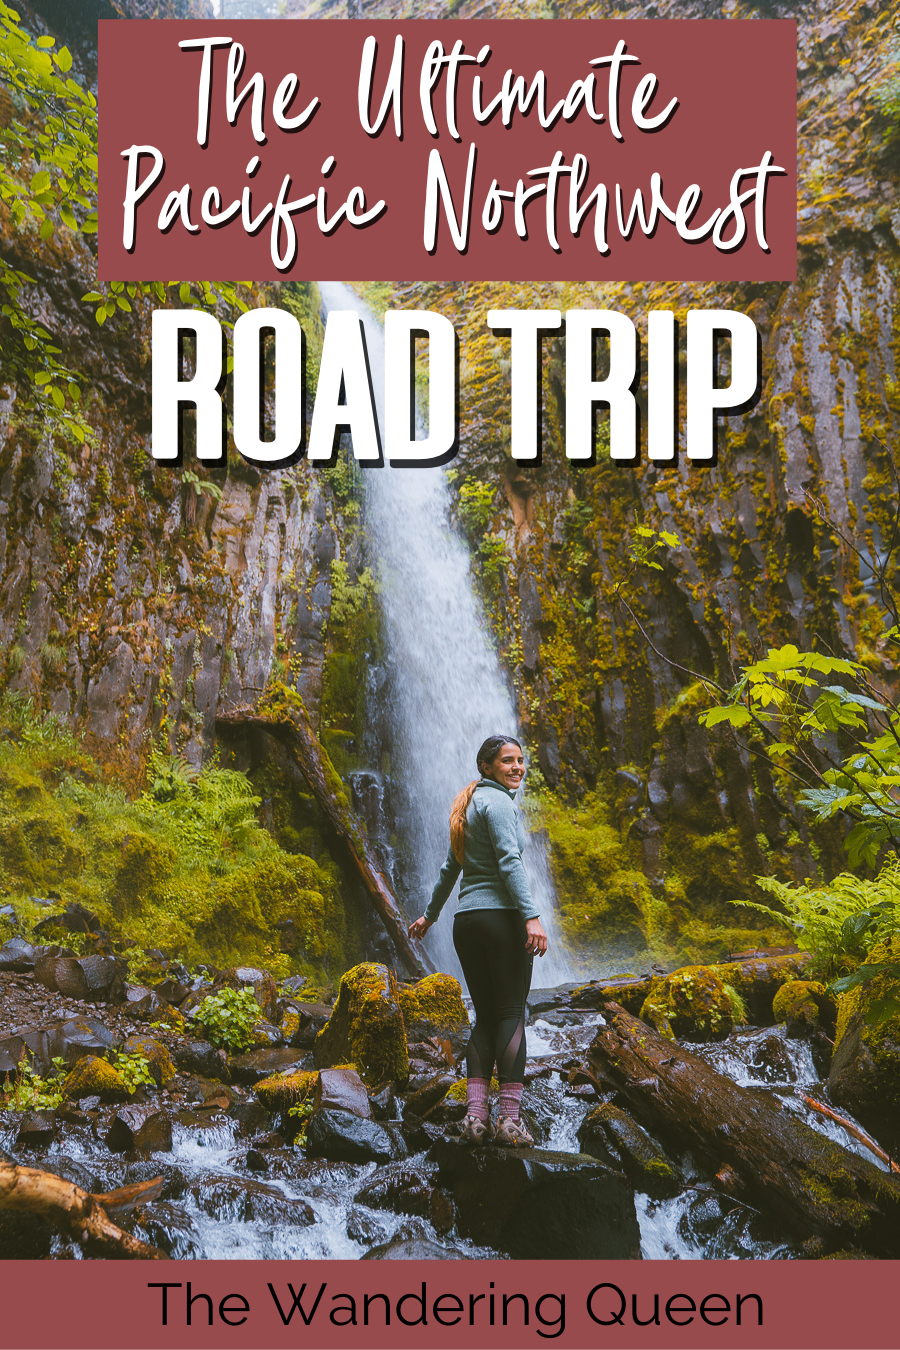 The Ultimate Checklist For Road Trip Essentials - The Wandering Queen